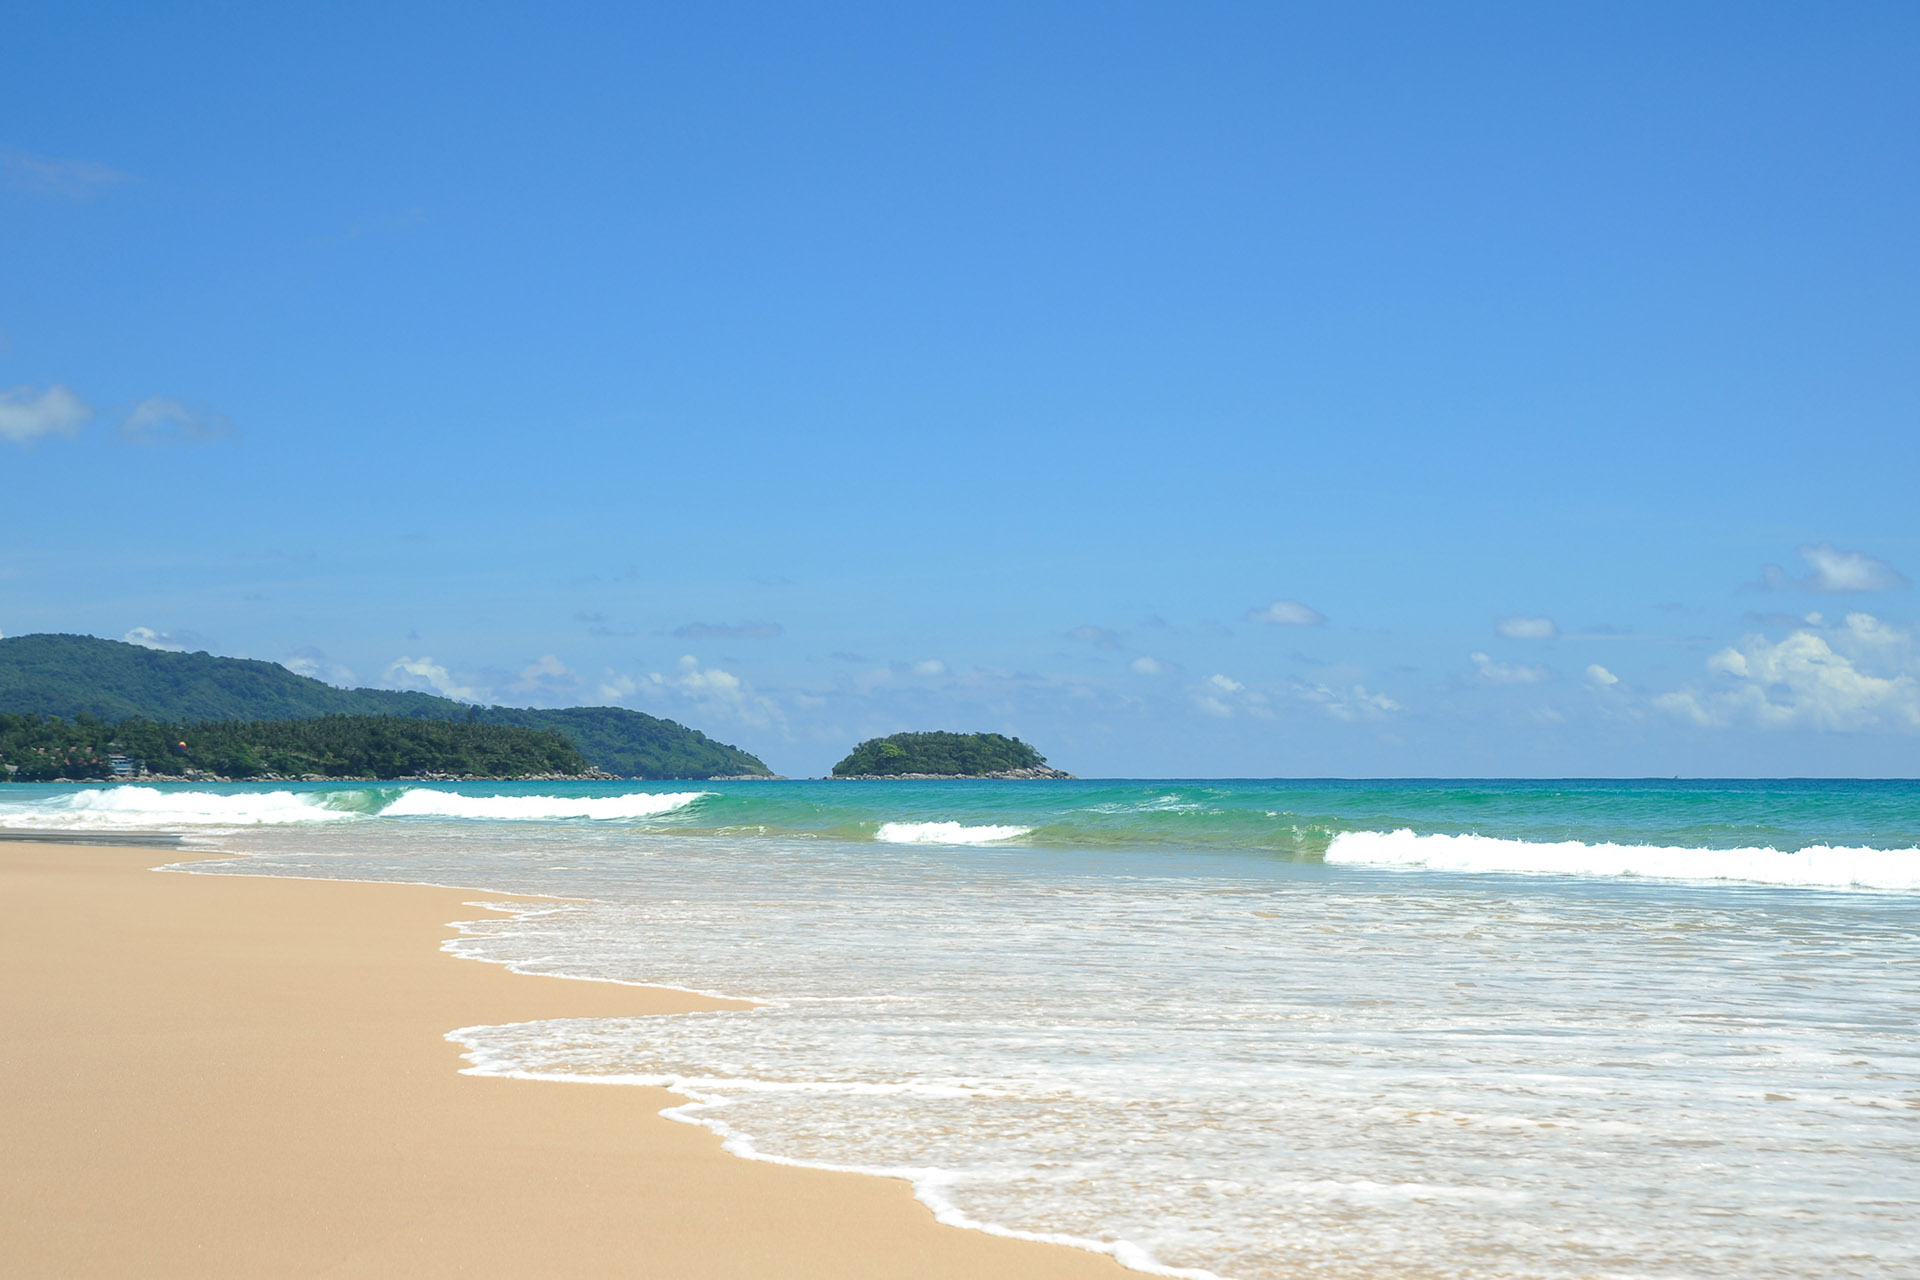 Karon Beach on a sunny day with the view of Poo island